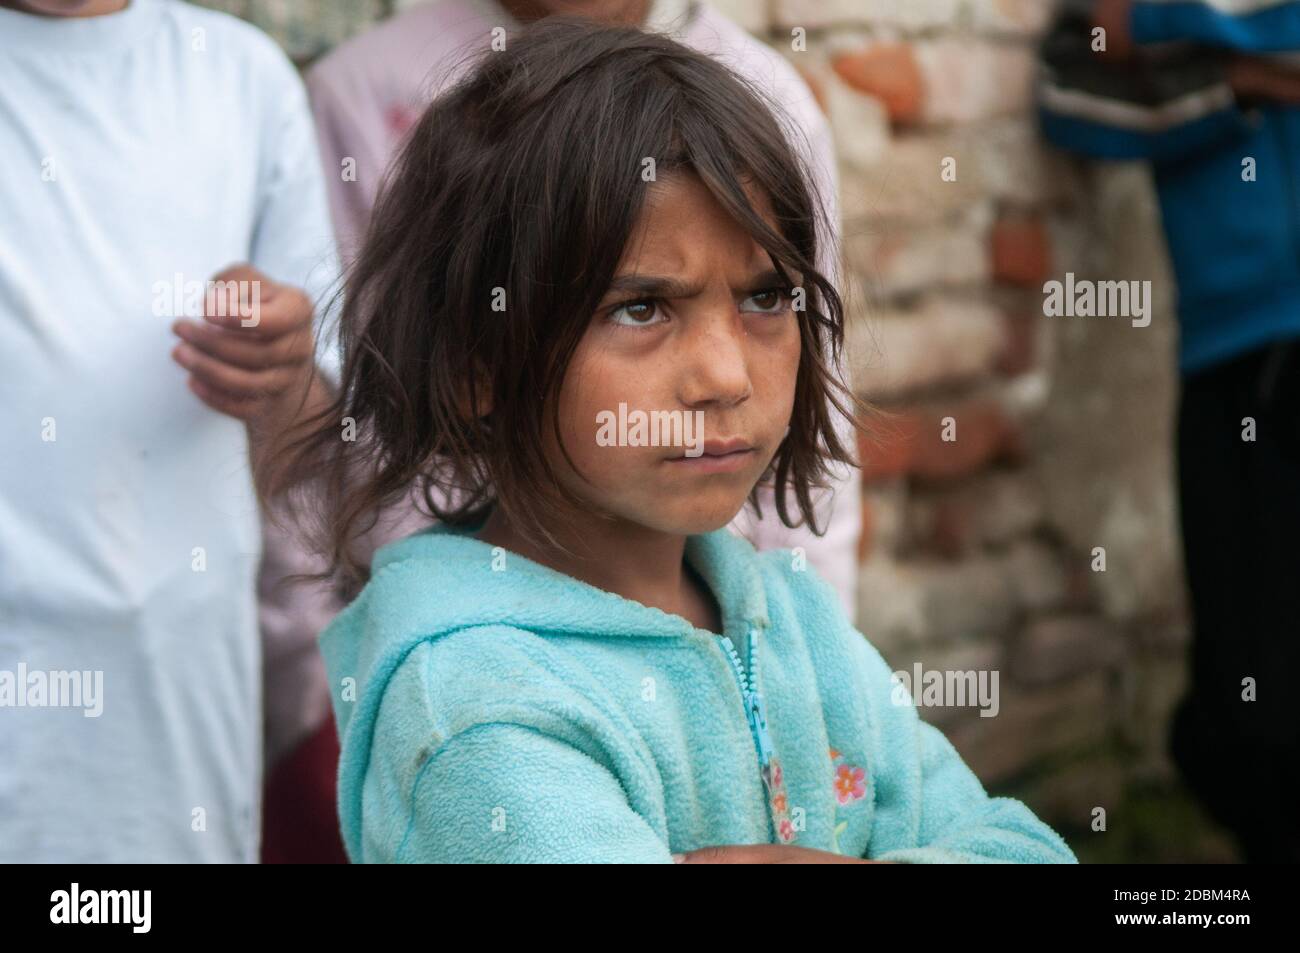 5/16/2018. Lomnicka, Slovakia. Roma community in the heart of Slovakia, living in horrible conditions. Portrait of child. Stock Photo